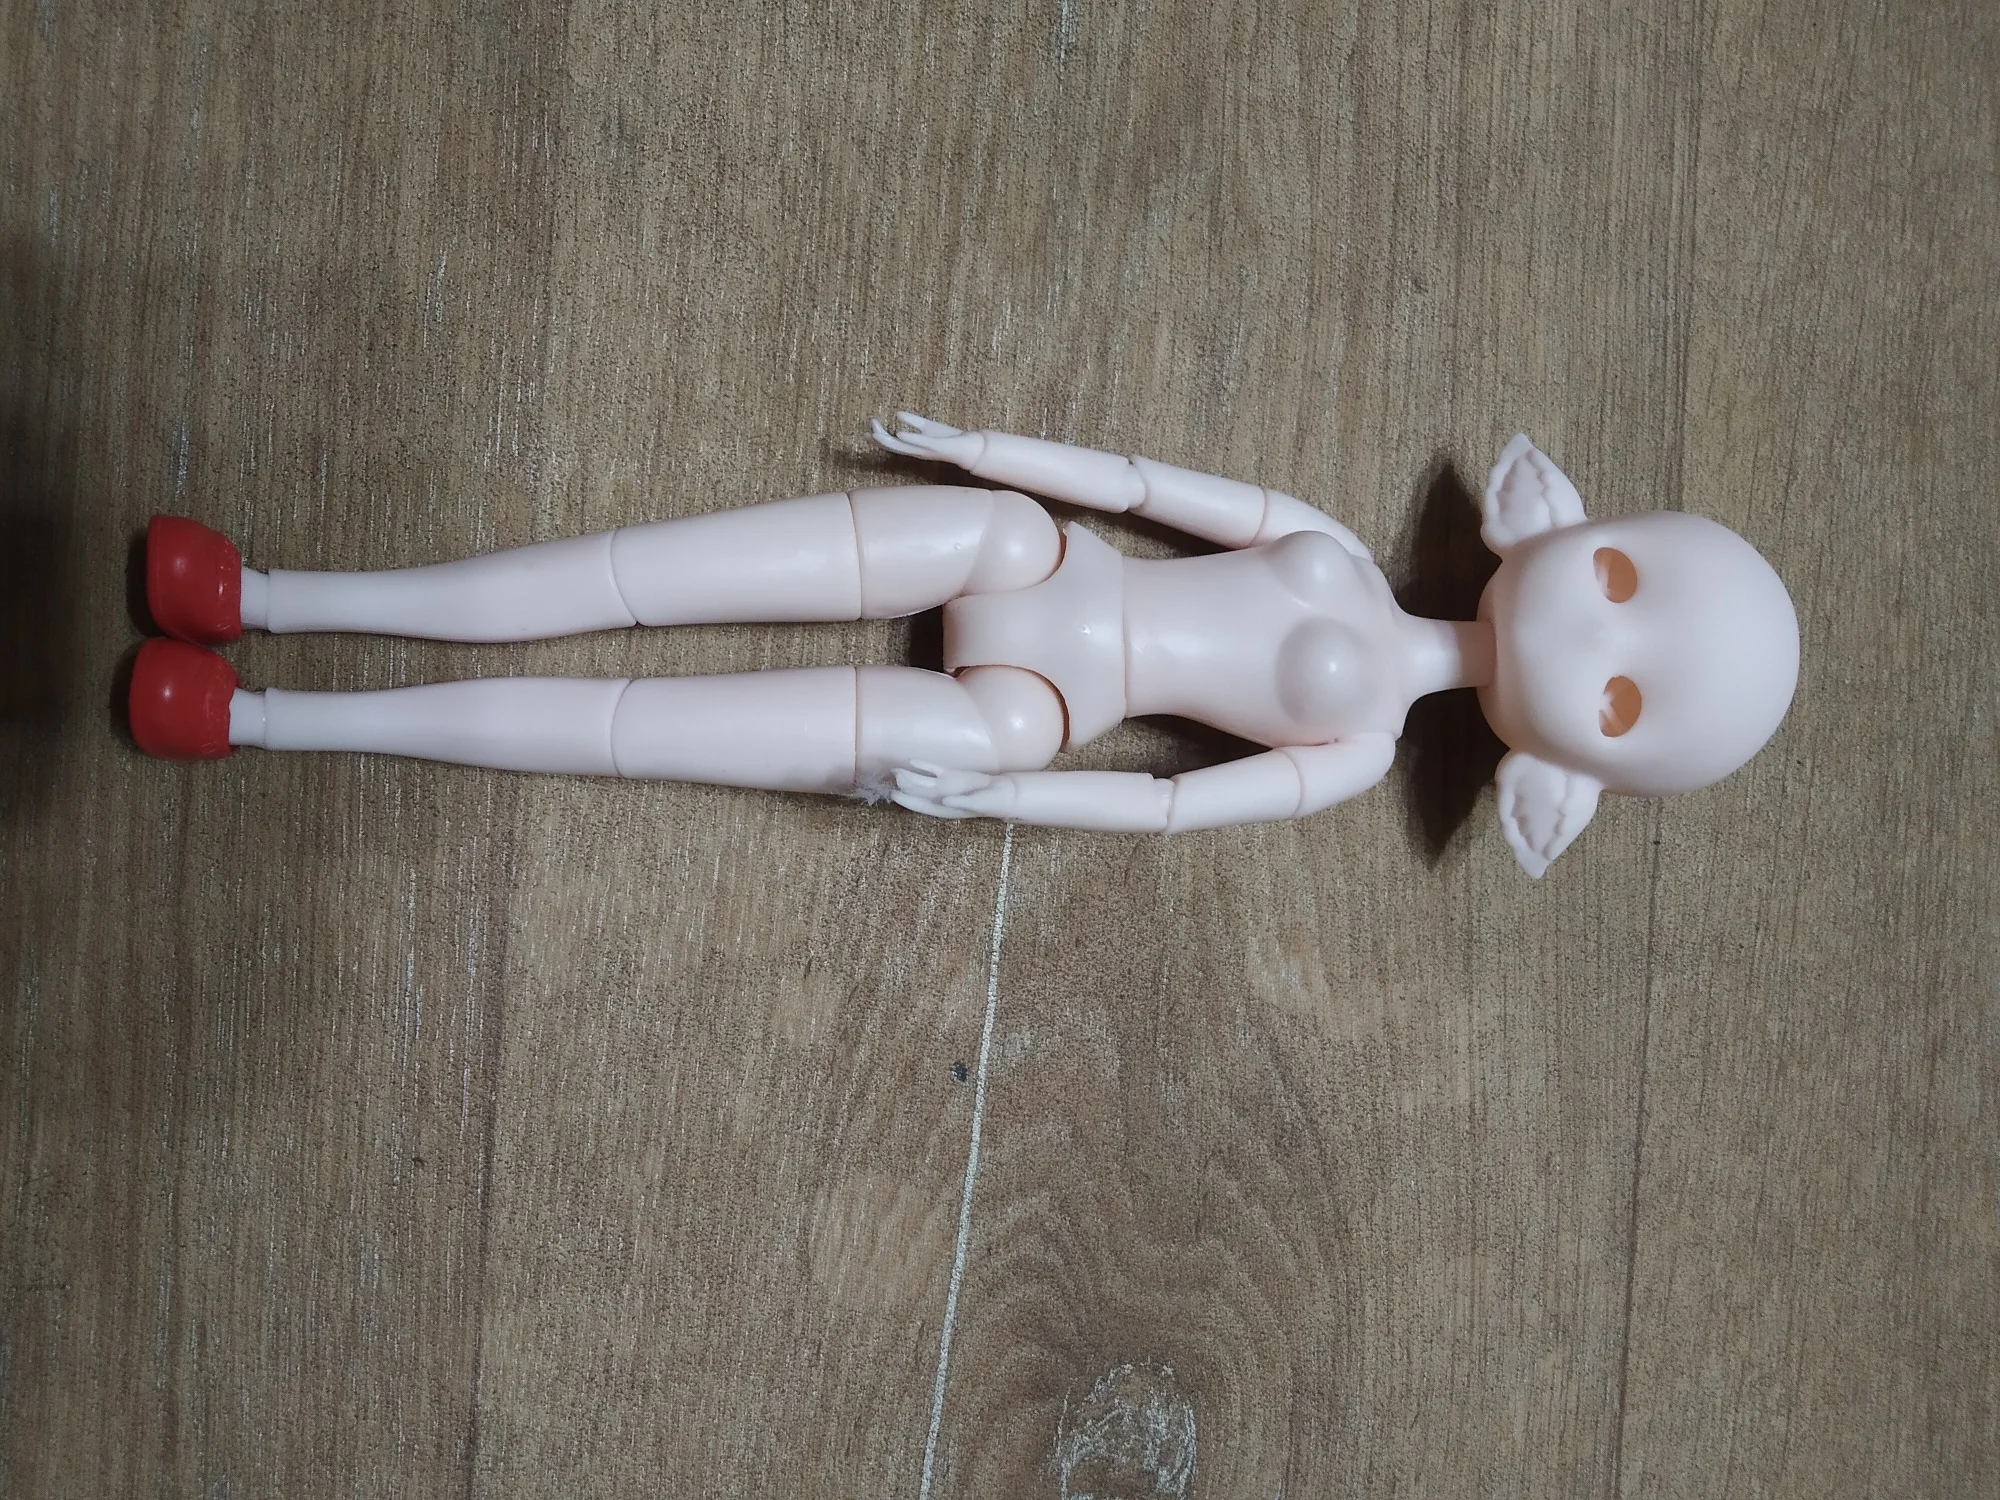 1/7 Bjd Elf Doll Accessories Without Makeup Doll Head 3D Eyes 18 Joints Movable Body Dress Up Accessories Children Toys